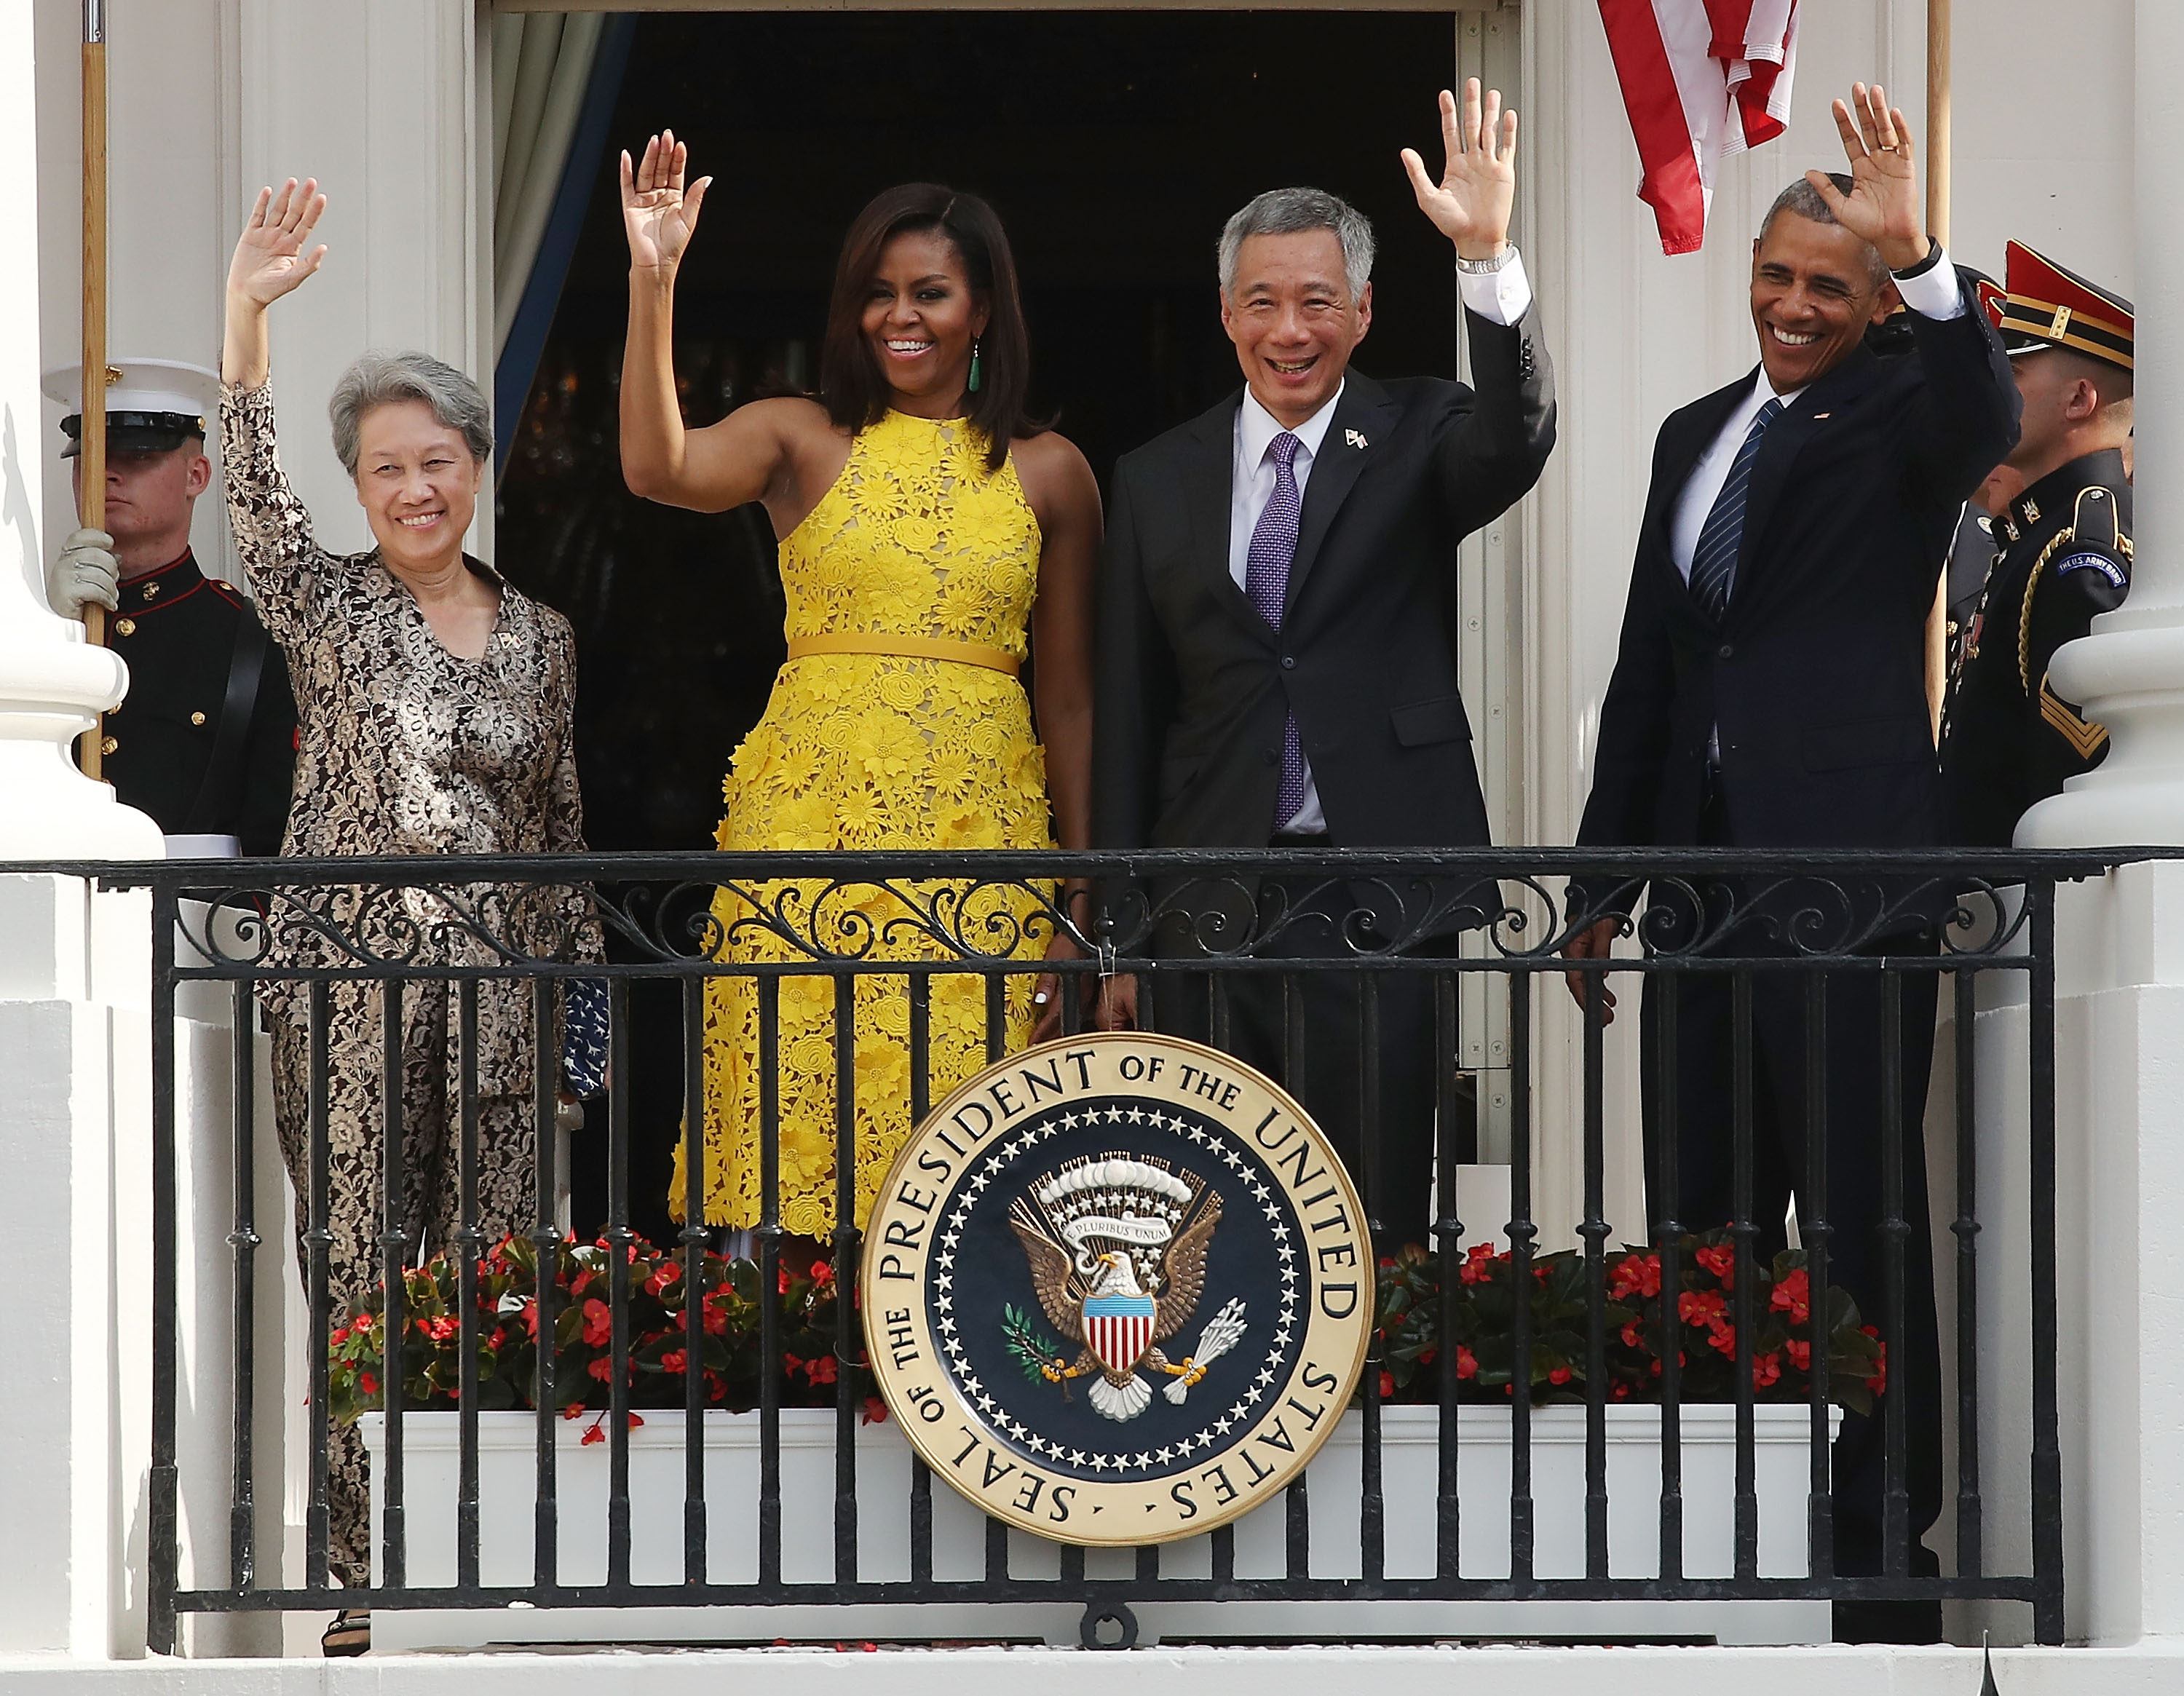 WASHINGTON, DC - AUGUST 02: U.S. President Barack Obama (R) and first lady Michelle Obama (2nd L) stand with Singapore Prime Minister Lee Hsien Loong and his wife Ho Ching during an arrival ceremony at the White House August 2, 2016 in Washington, DC. The president and first lady will host a state dinner in Loong's honor, just the 11th state dinner thrown since Obama became president. (Photo by Mark Wilson/Getty Images)